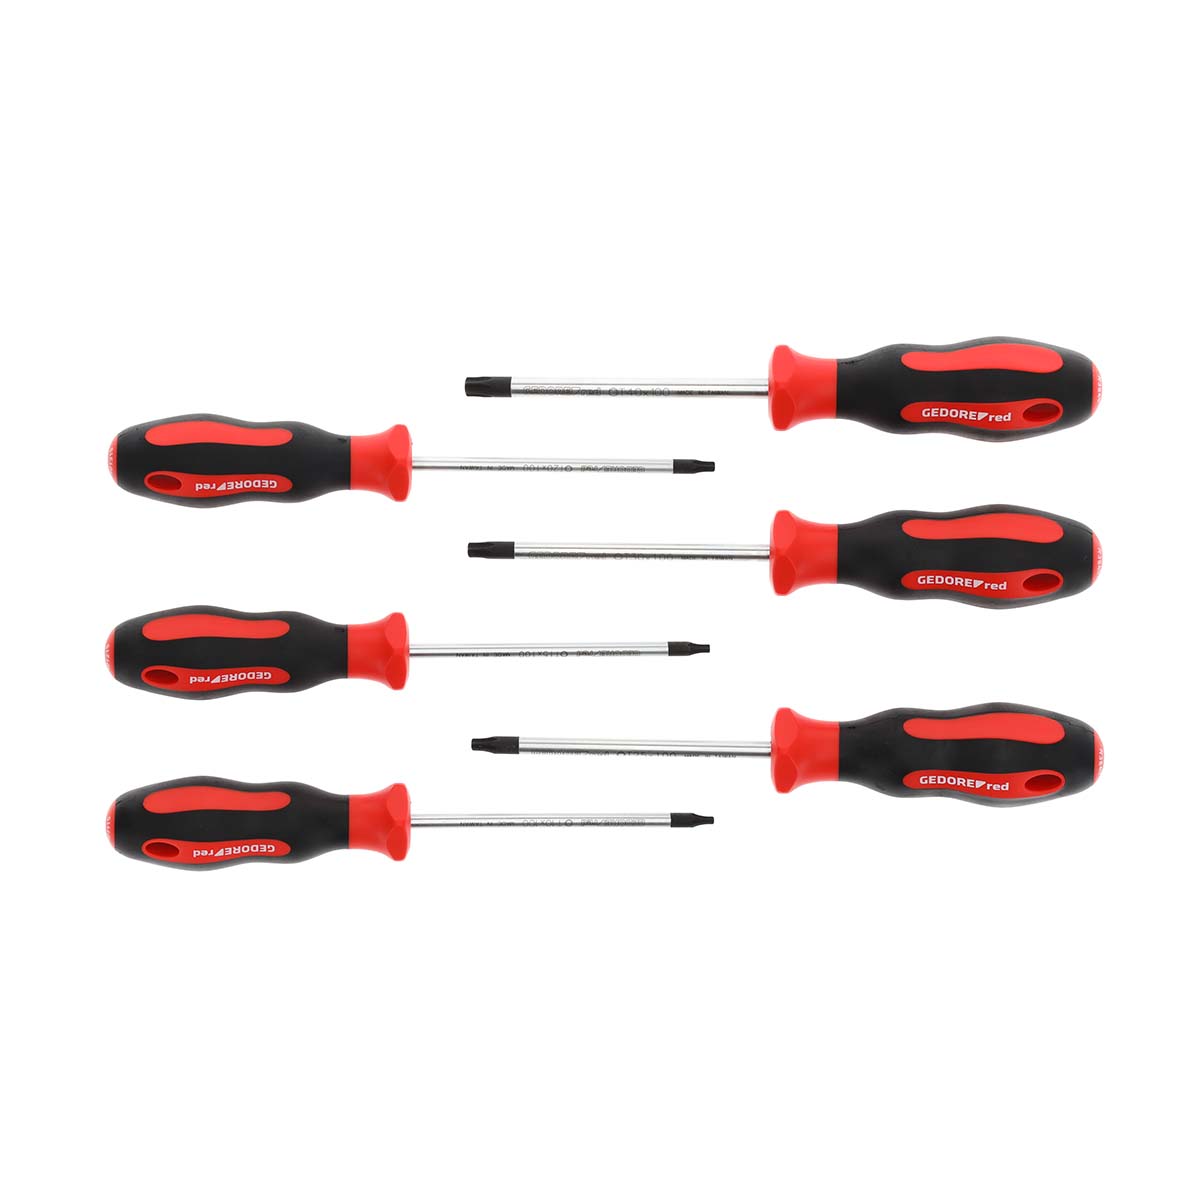 GEDORE red R38402006 - 2-Component Screwdriver Set T10-40, 6 Pieces (3301272)